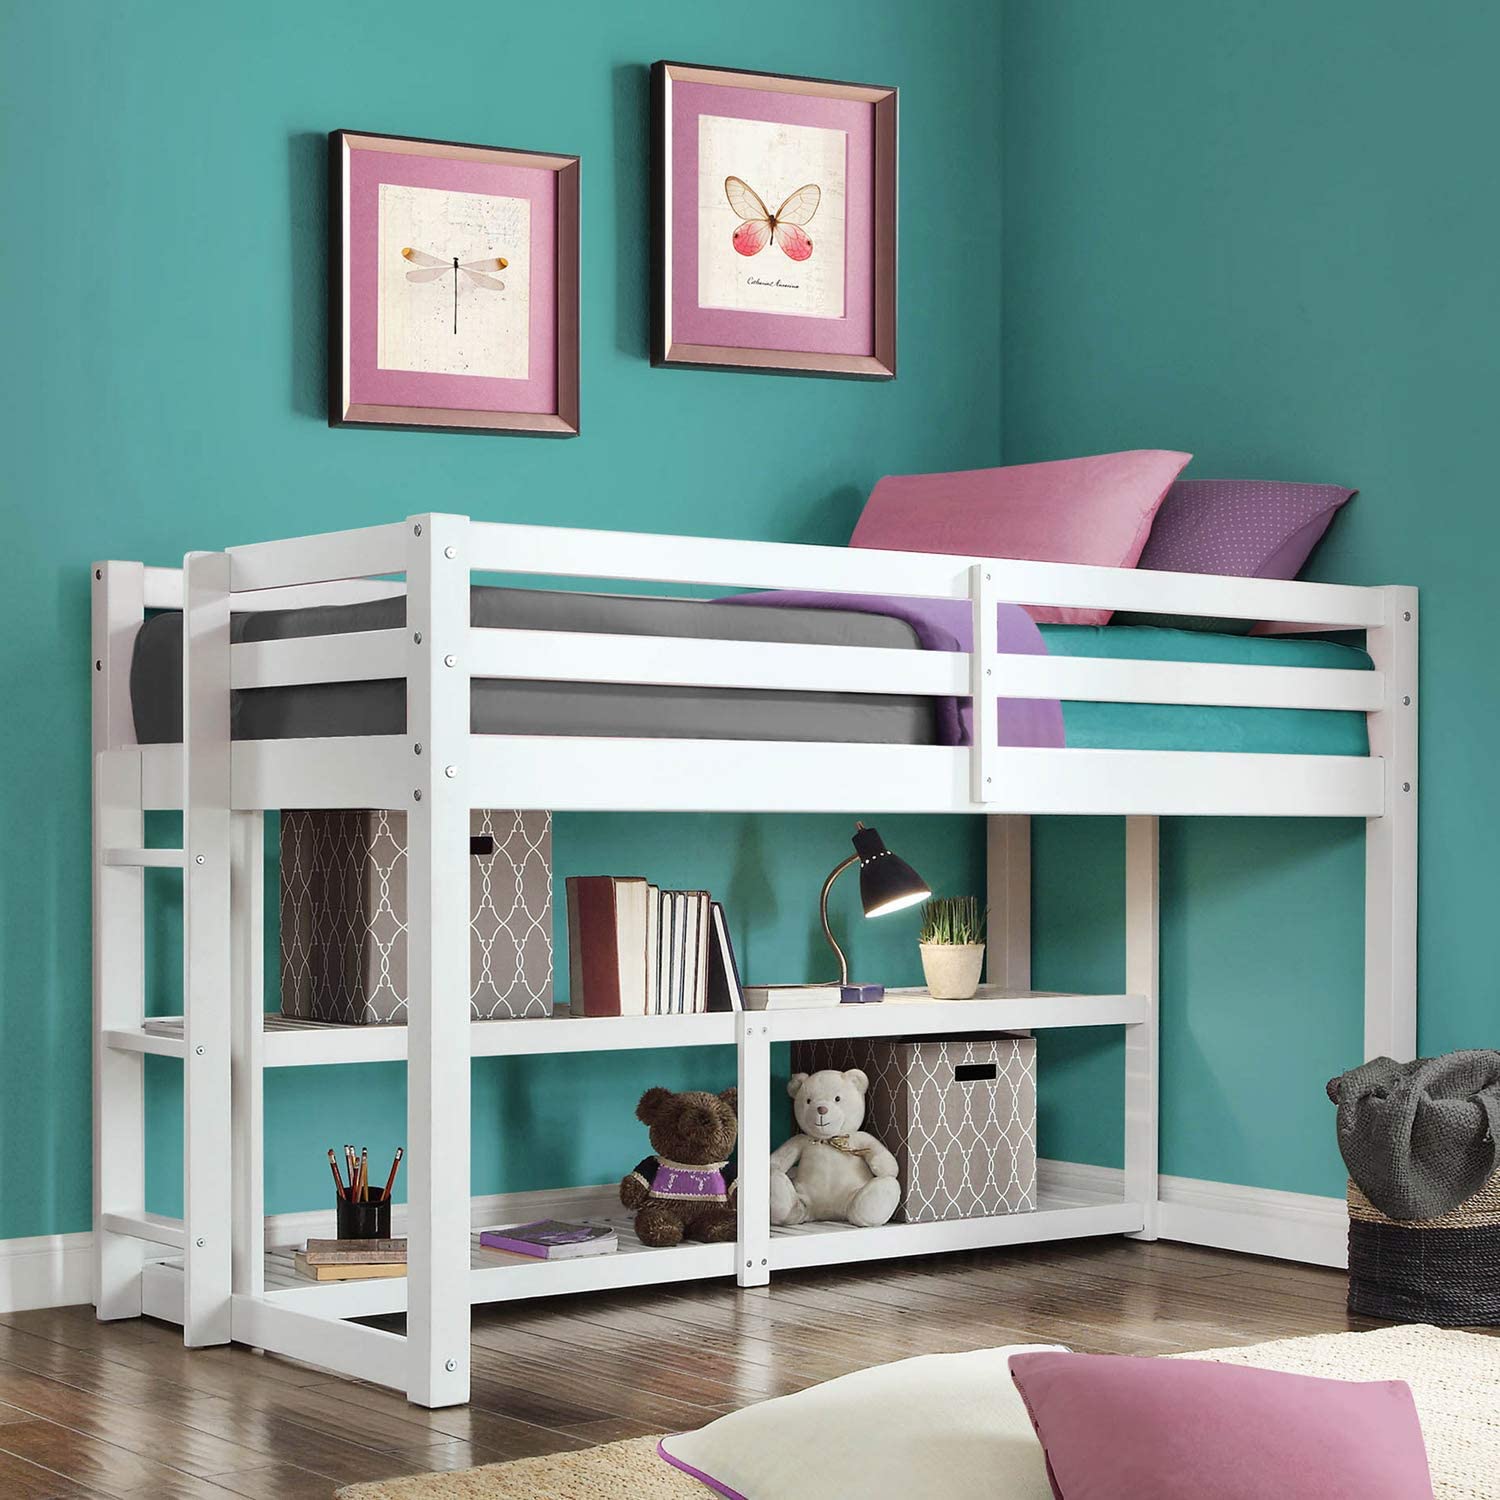 Better Homes and Gardens Loft Storage Bed